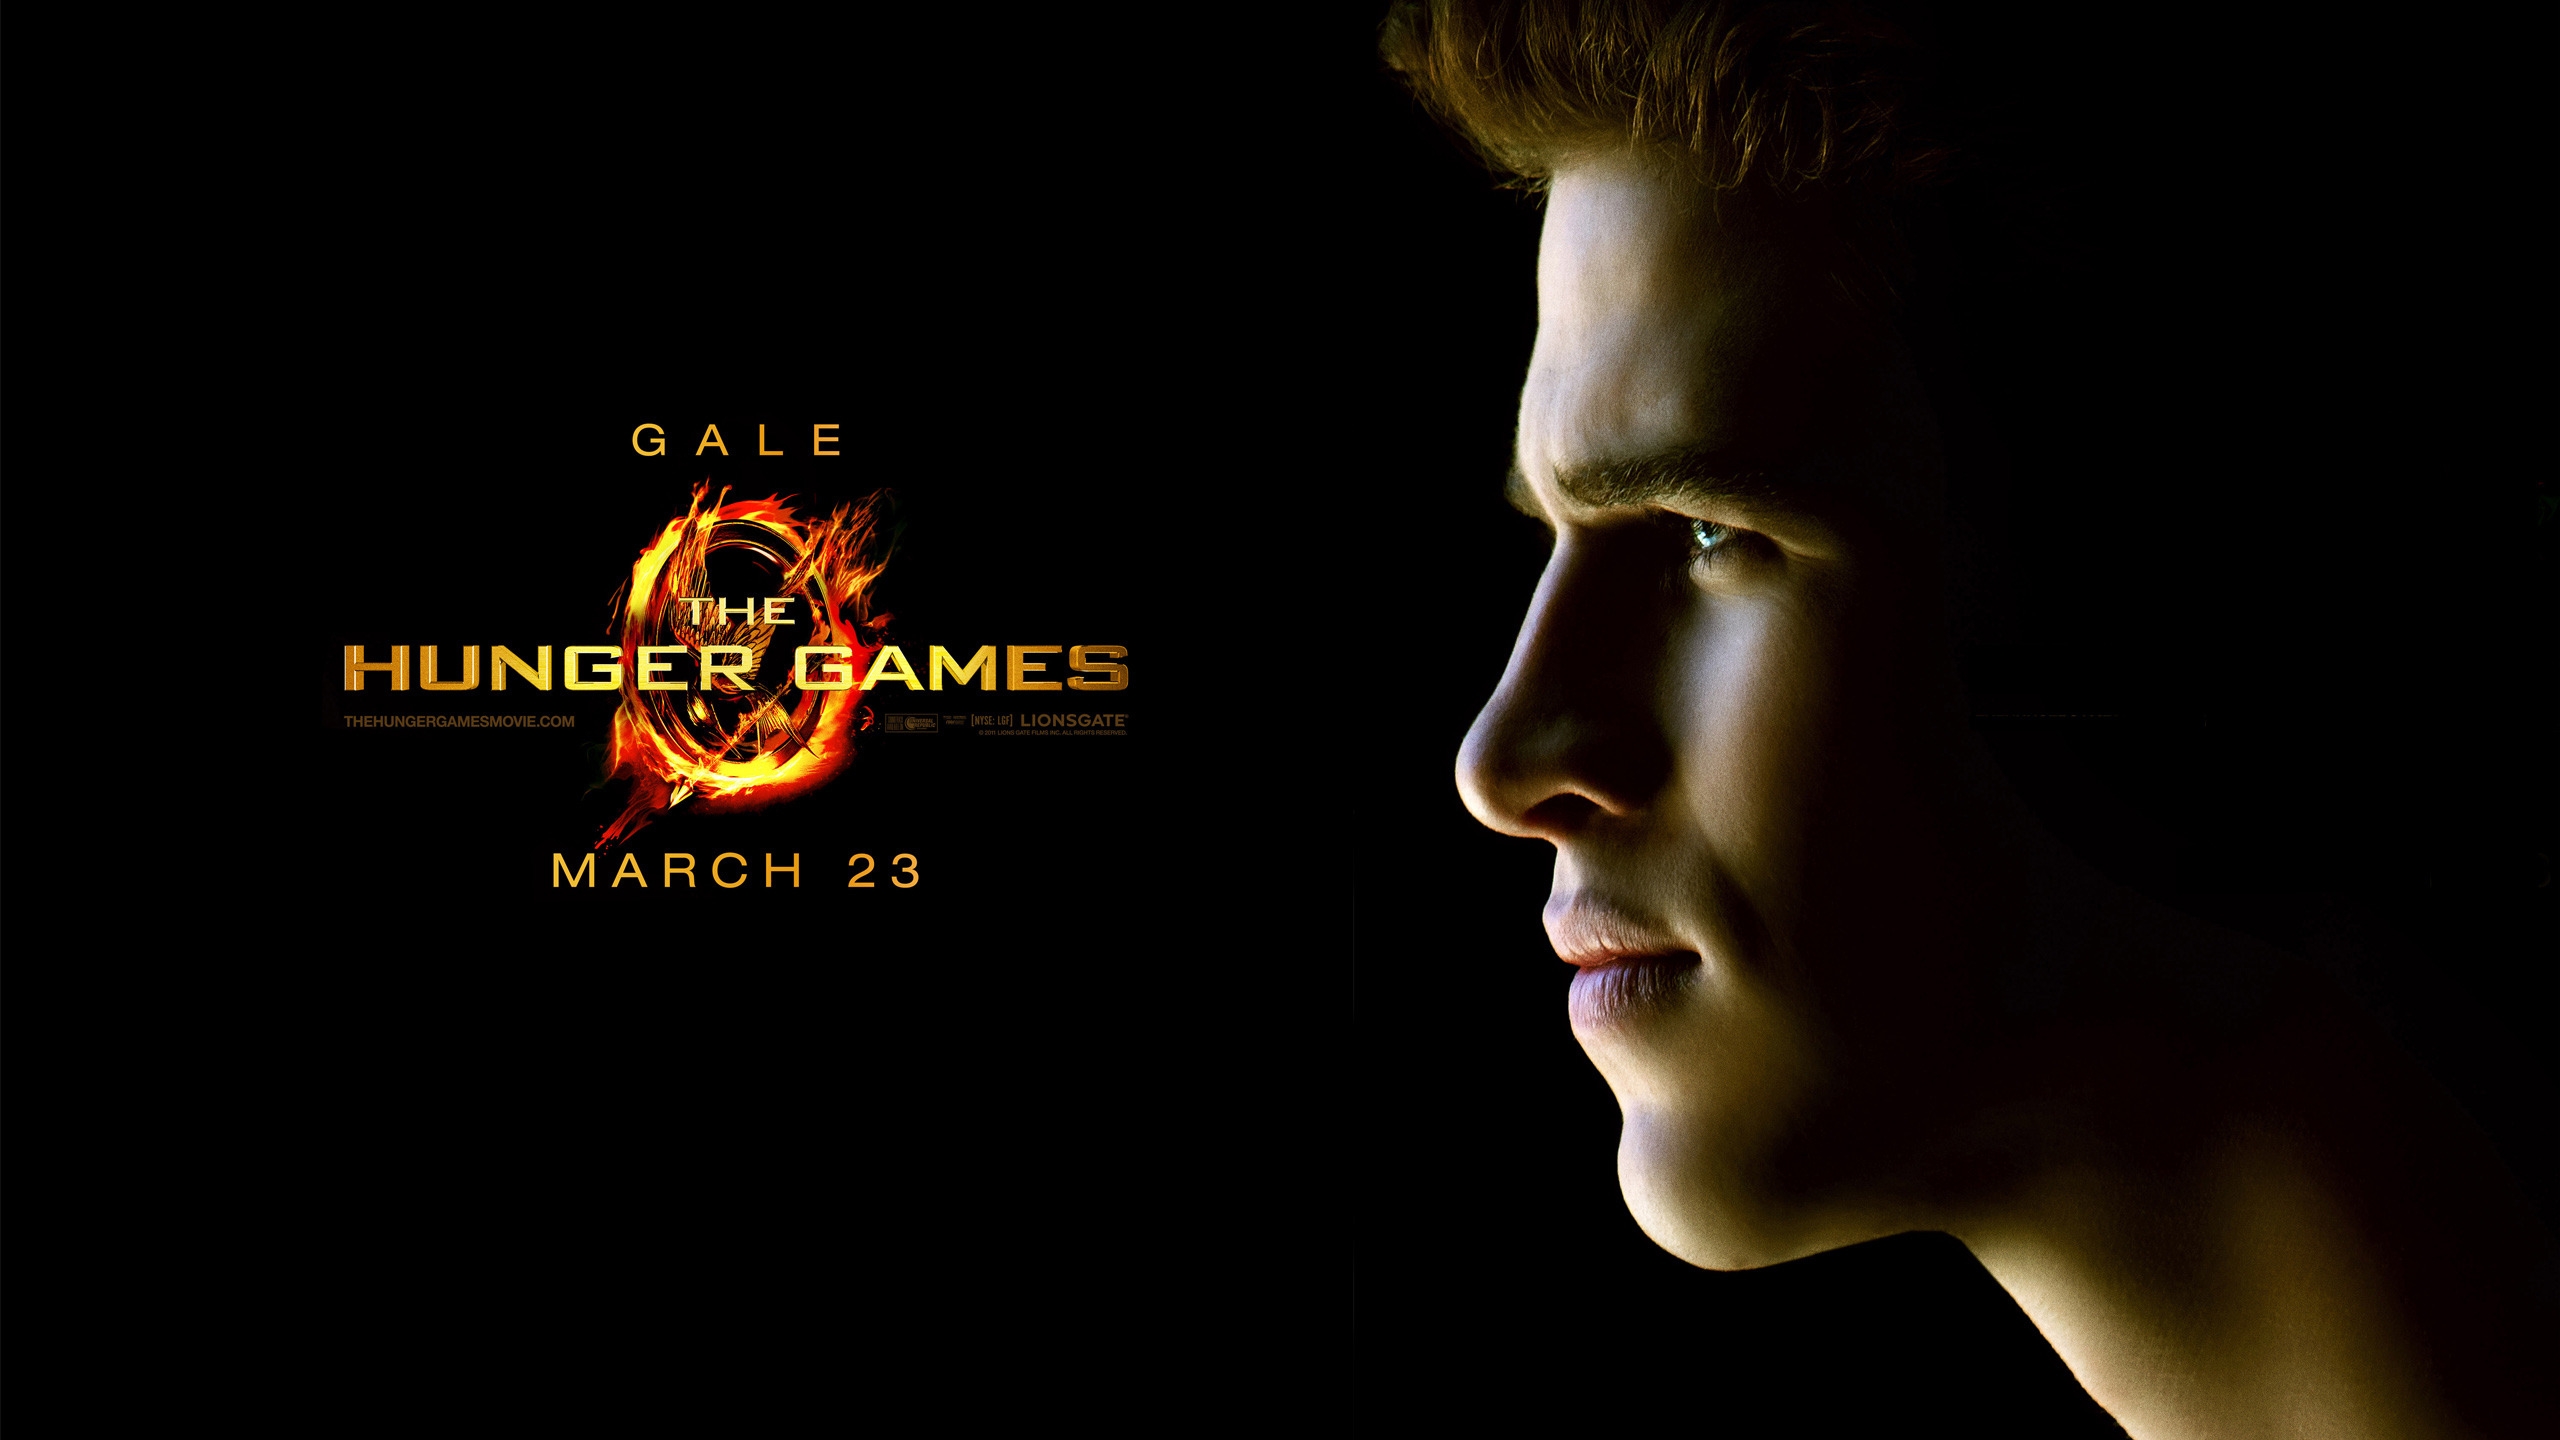 The Hunger Games Gale for 2560x1440 HDTV resolution